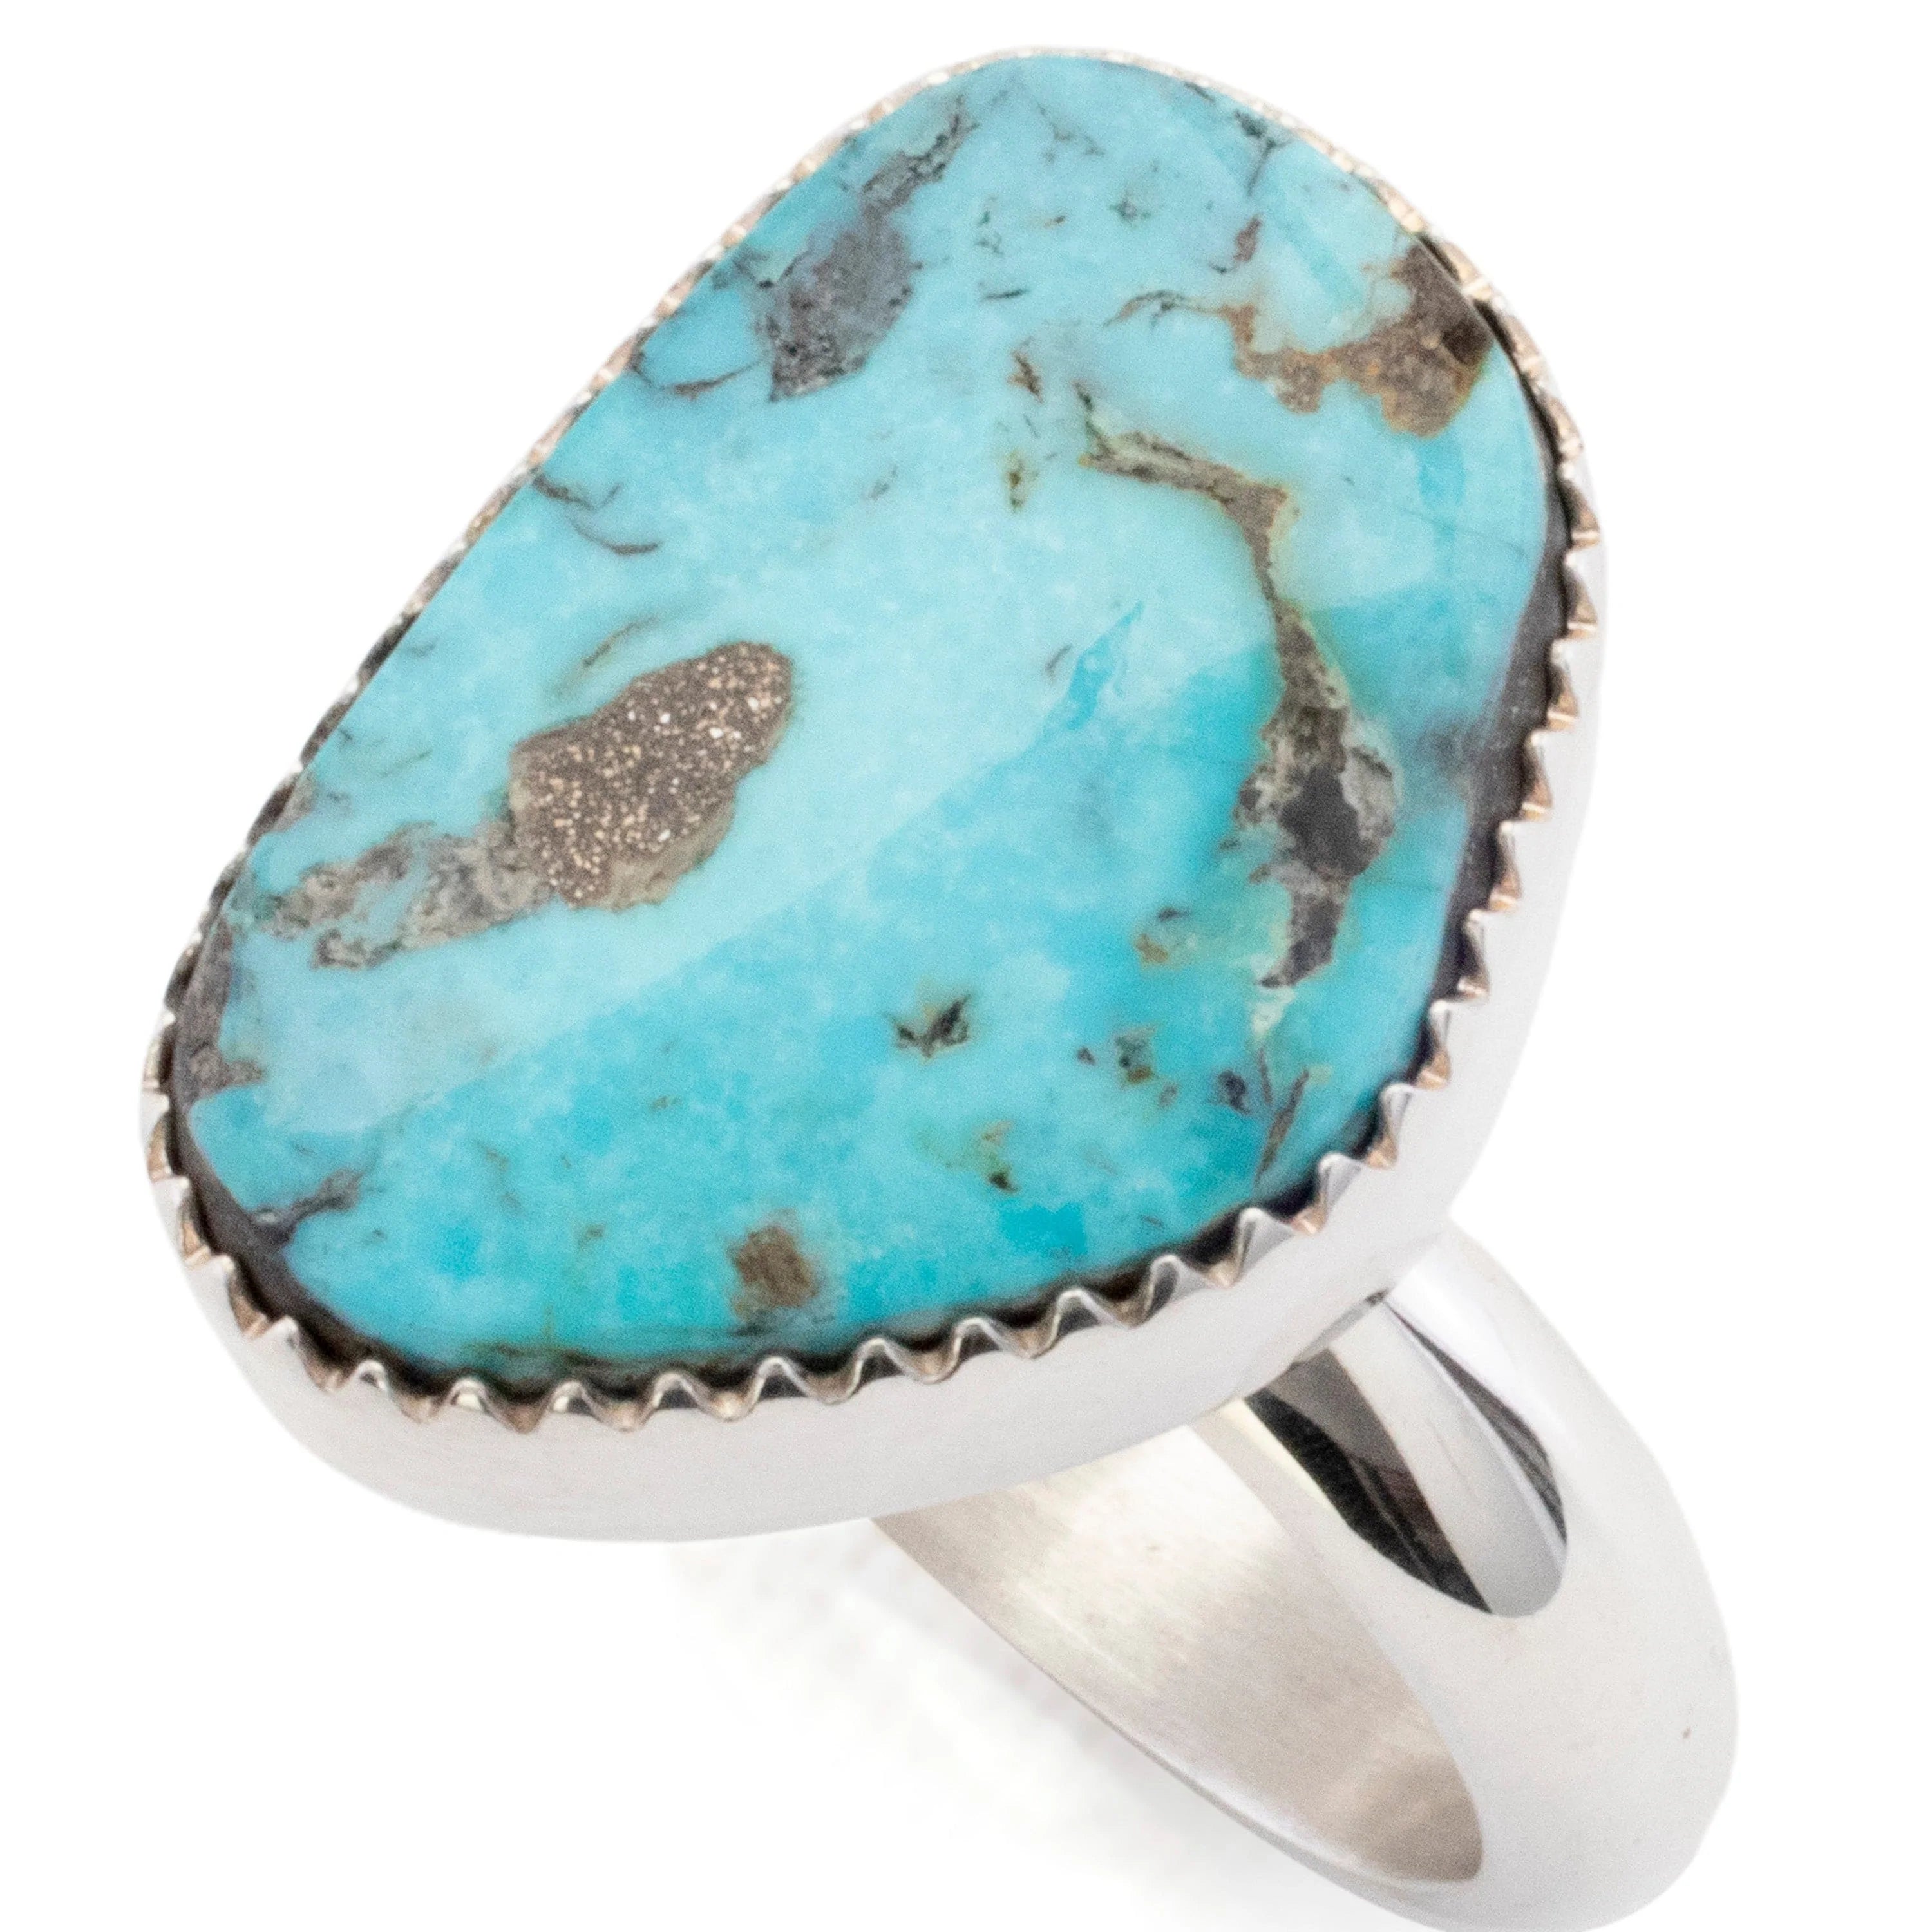 Kalifano Southwest Silver Jewelry 11 Kingman Turquoise USA Handmade 925 Sterling Silver Ring NMR350.001.11